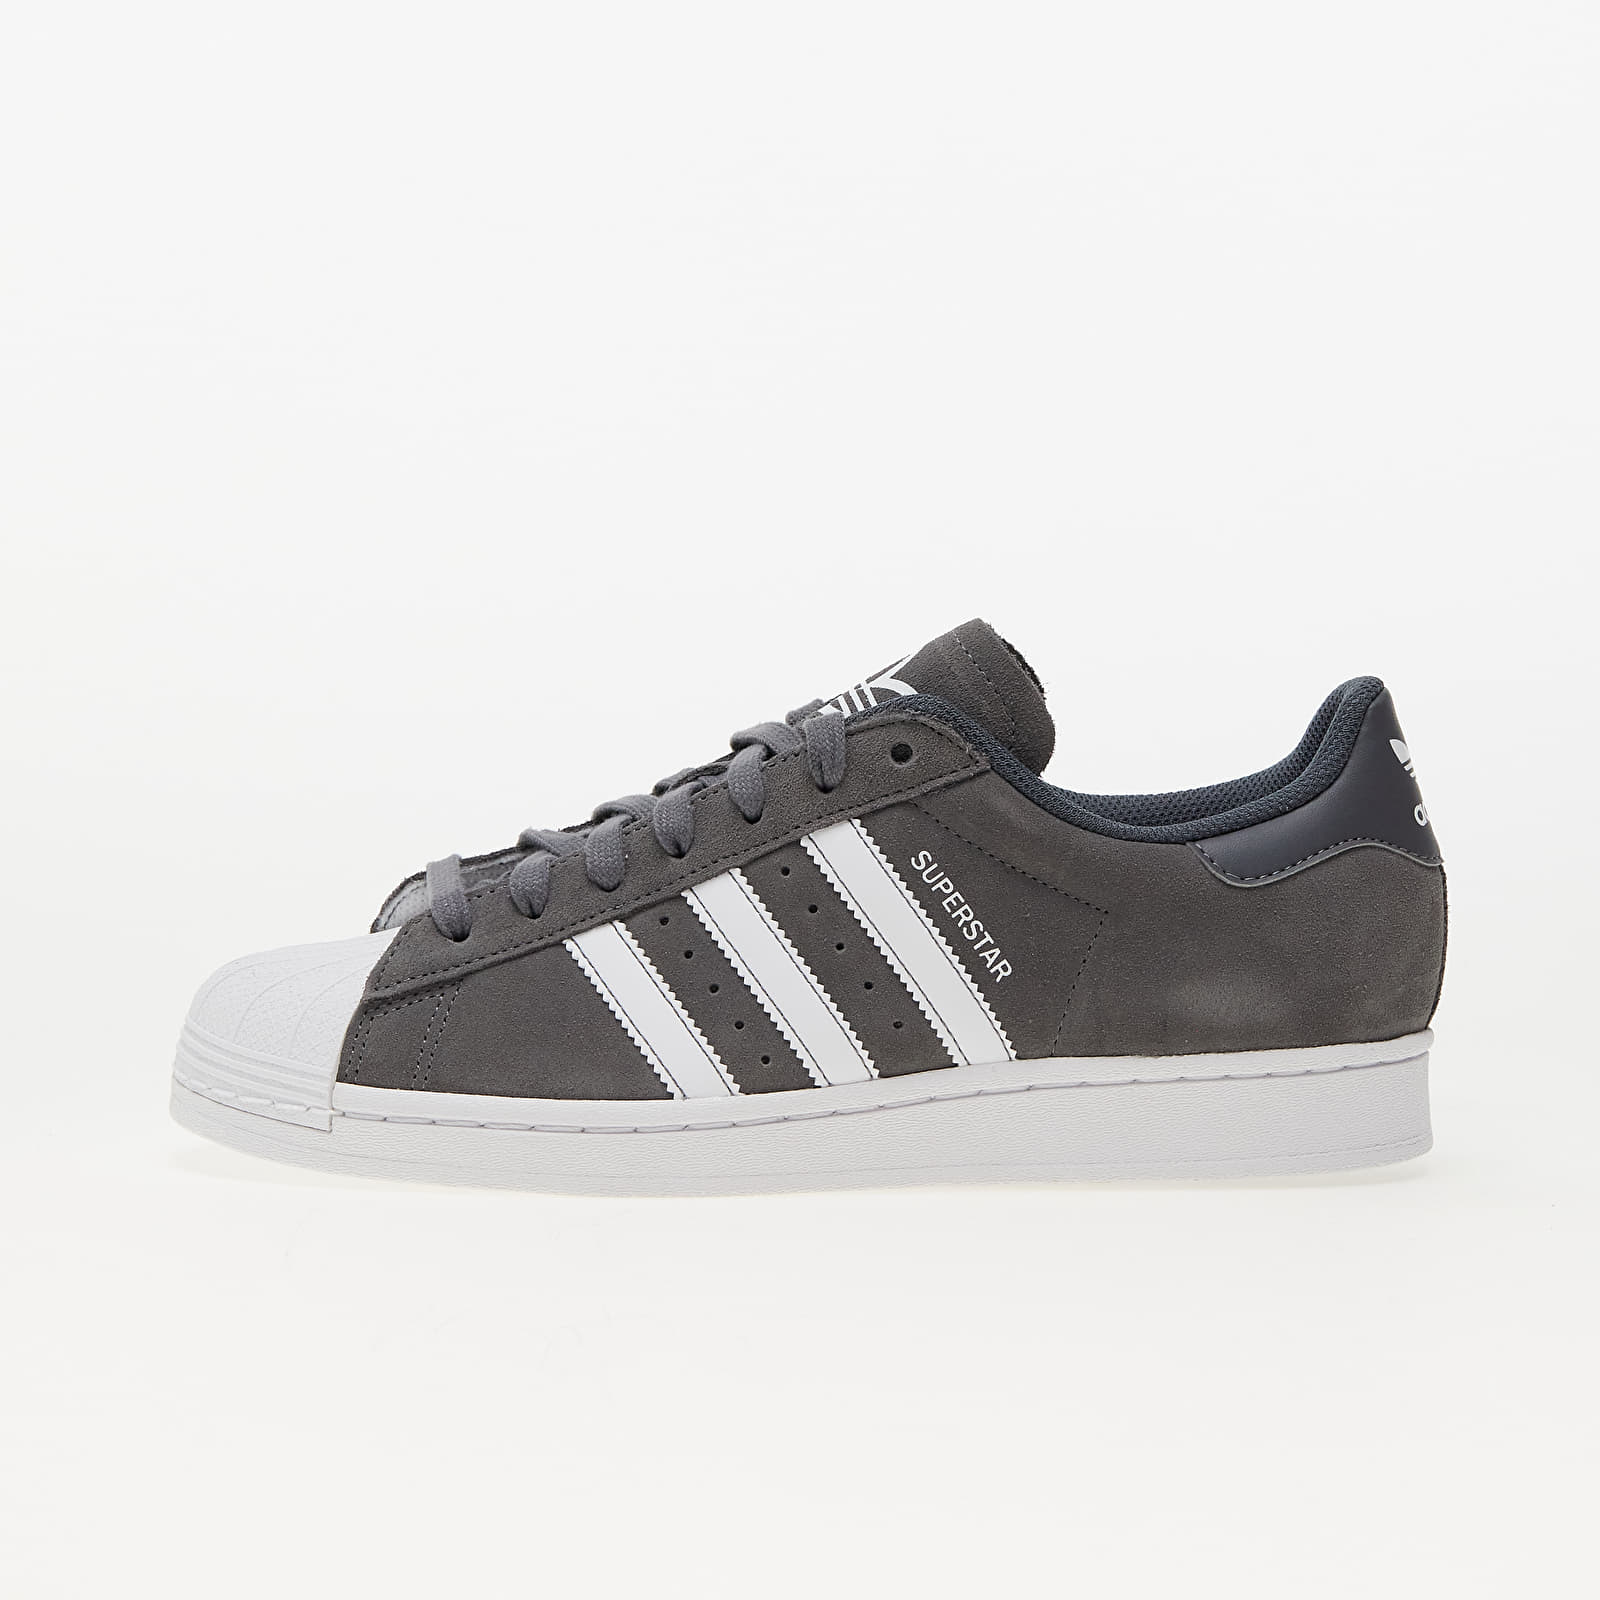 Men's shoes adidas Superstar Grey Four/ Ftw White/ Grey Five